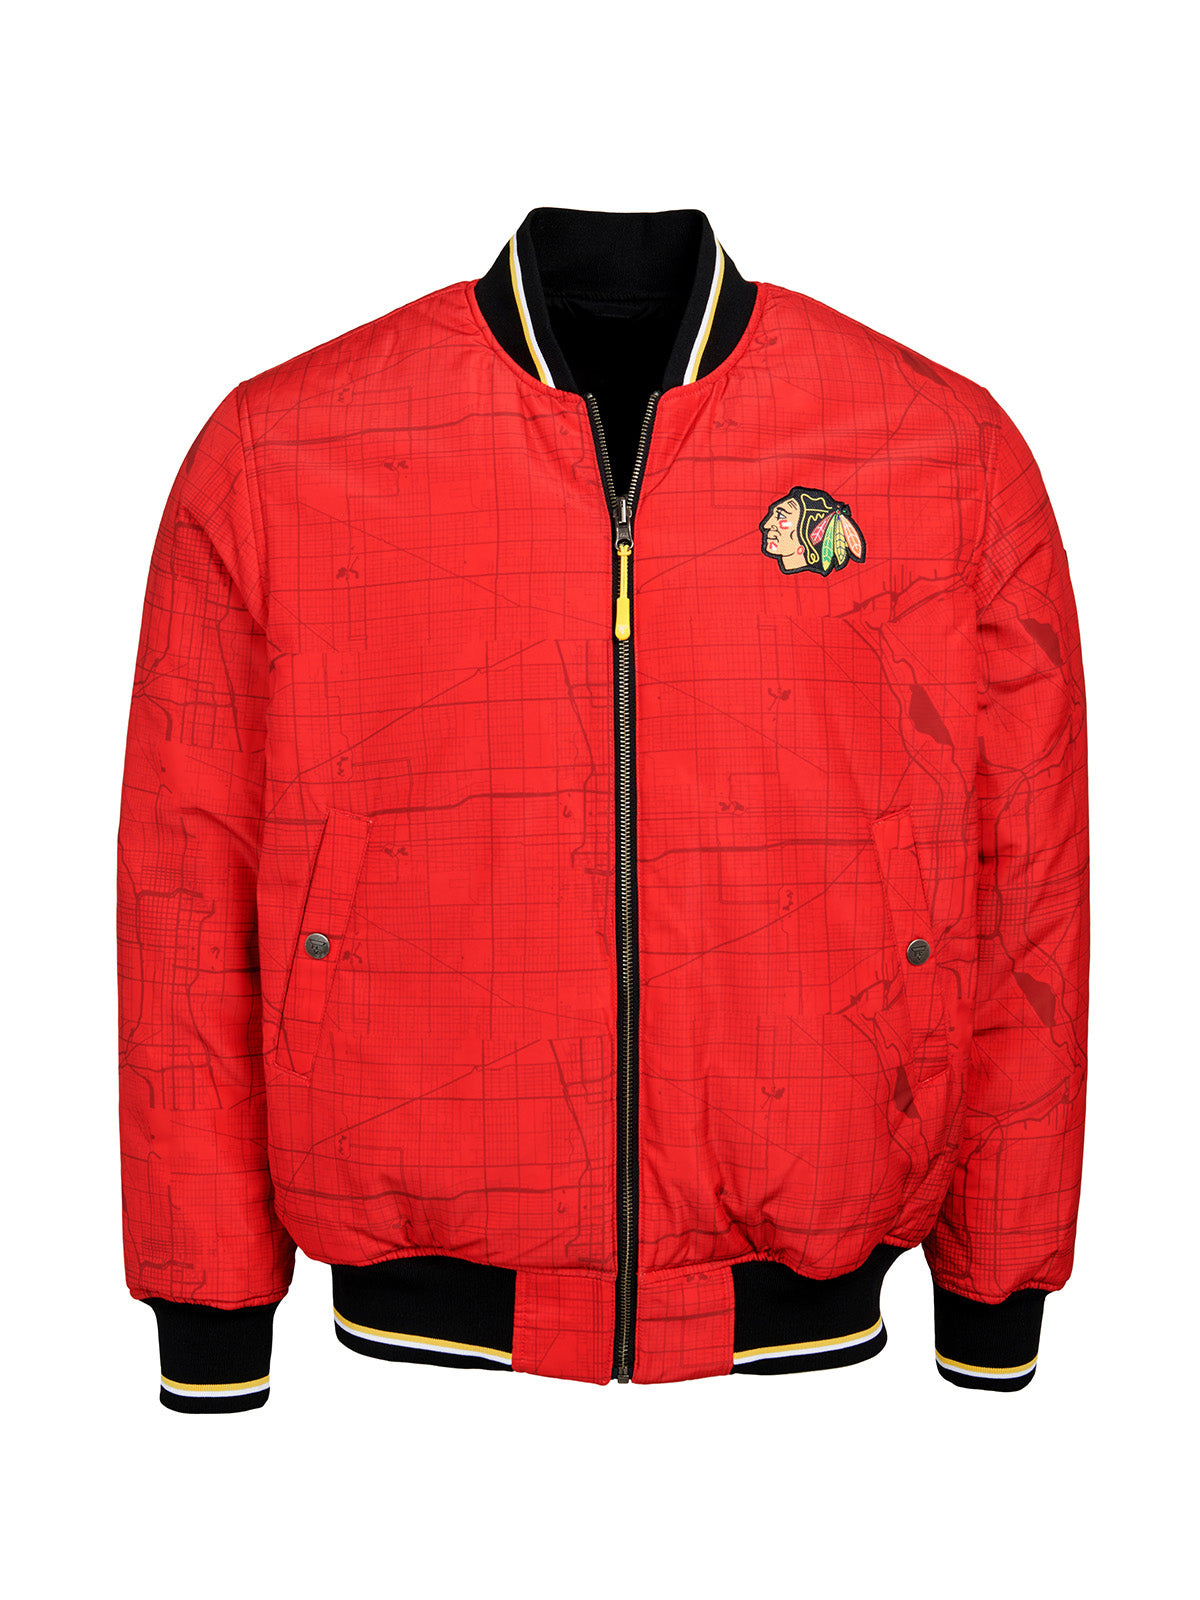 Chicago Blackhawks Bomber - Reversible bomber jacket featuring the iconic Chicago Blackhawks logo with ribbed cuffs, collar and hem in the team colors